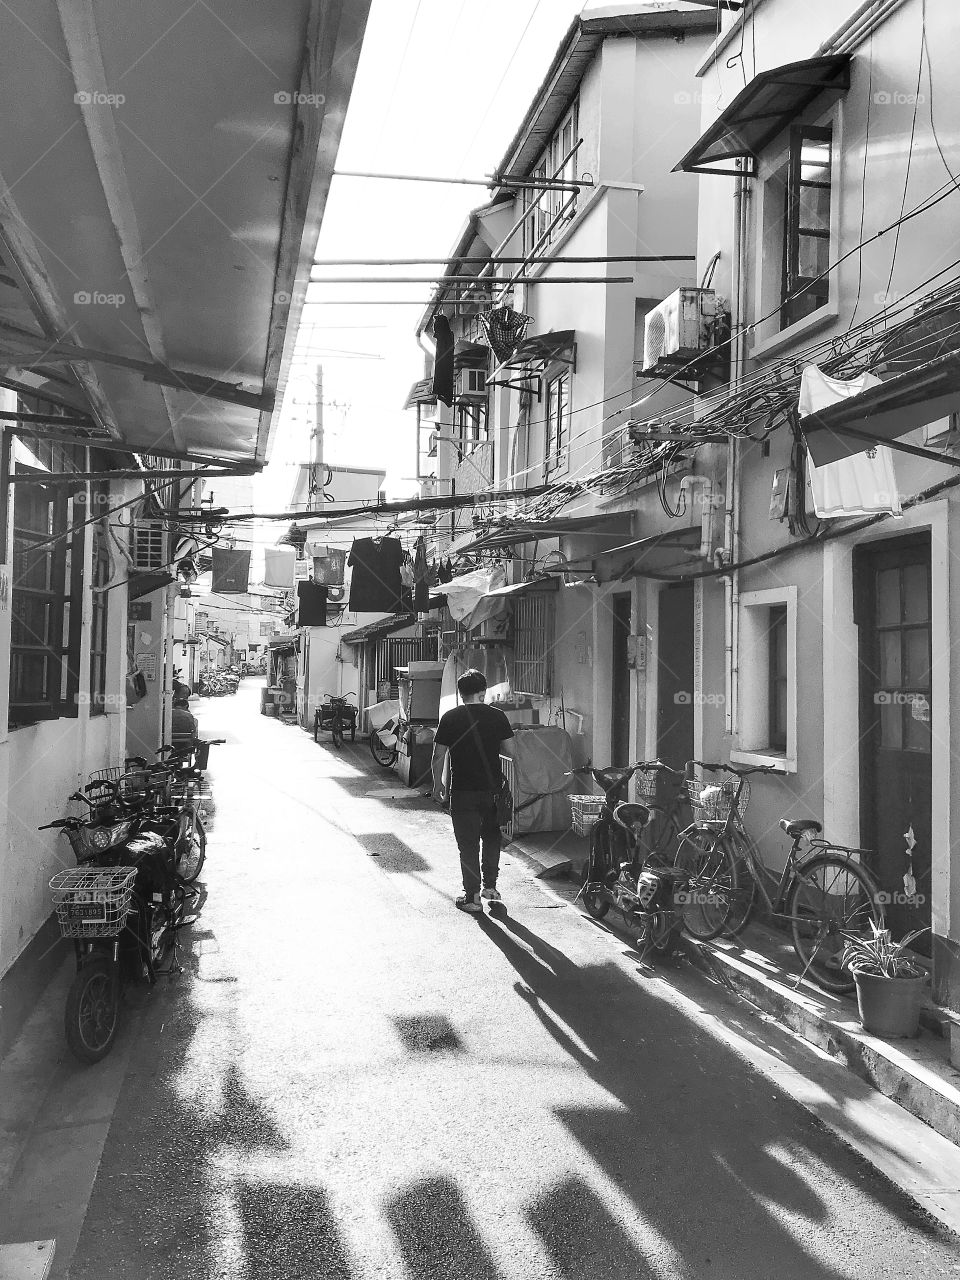 Black and white snap of the morning streets of old Shanghai - the area of Laoximen 